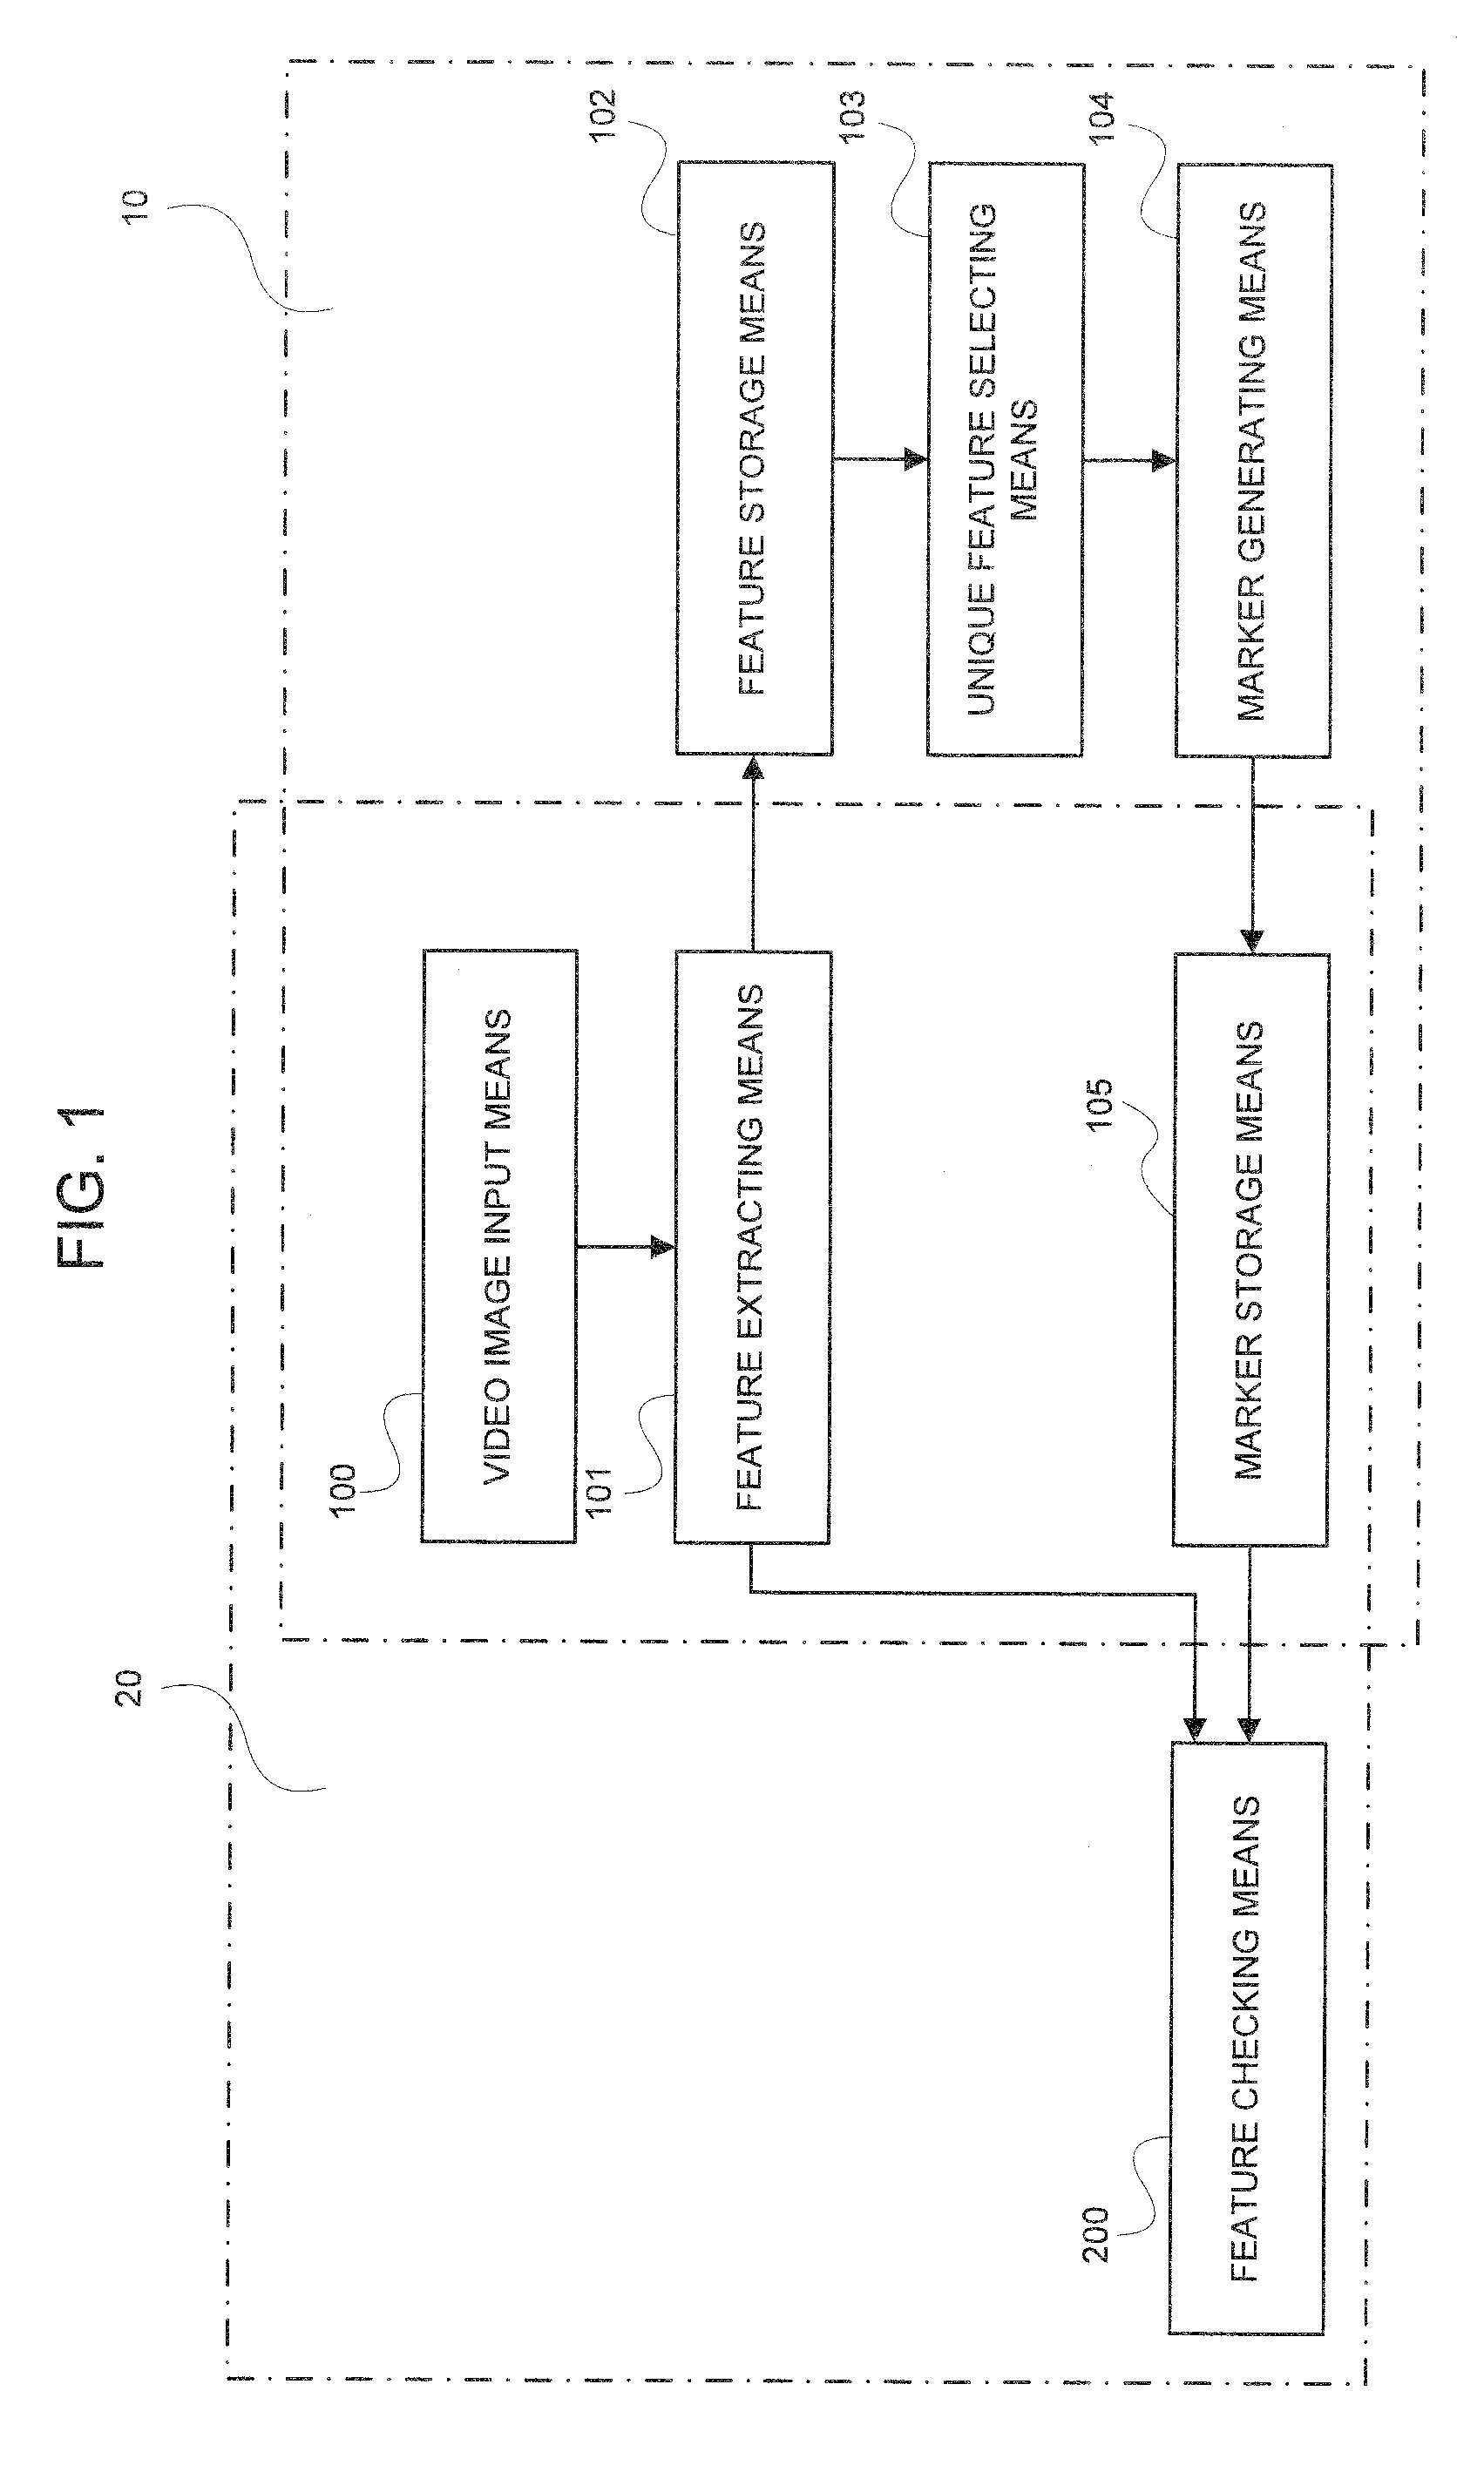 Marker generating and marker detecting system, method and program